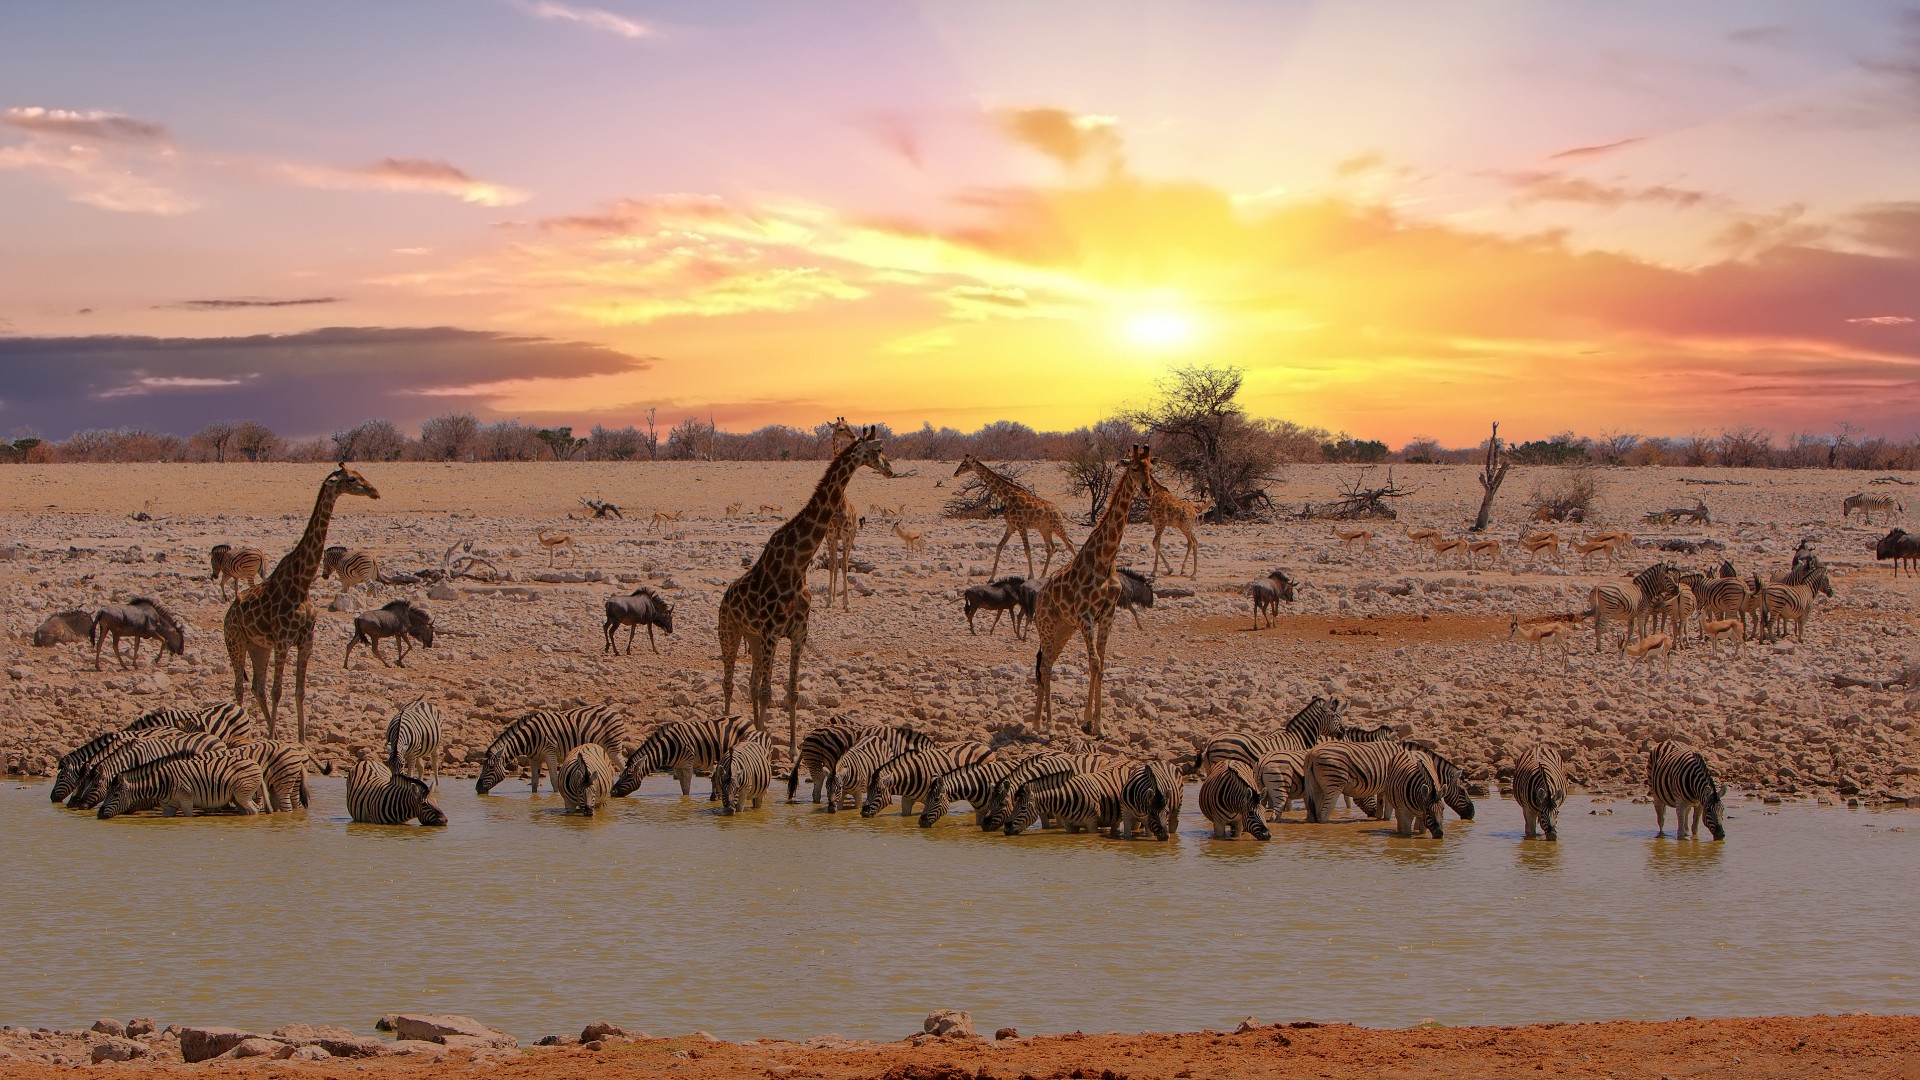 A sunset over he African savannah with zebra, giraffe and other animals drinking from a watering hole